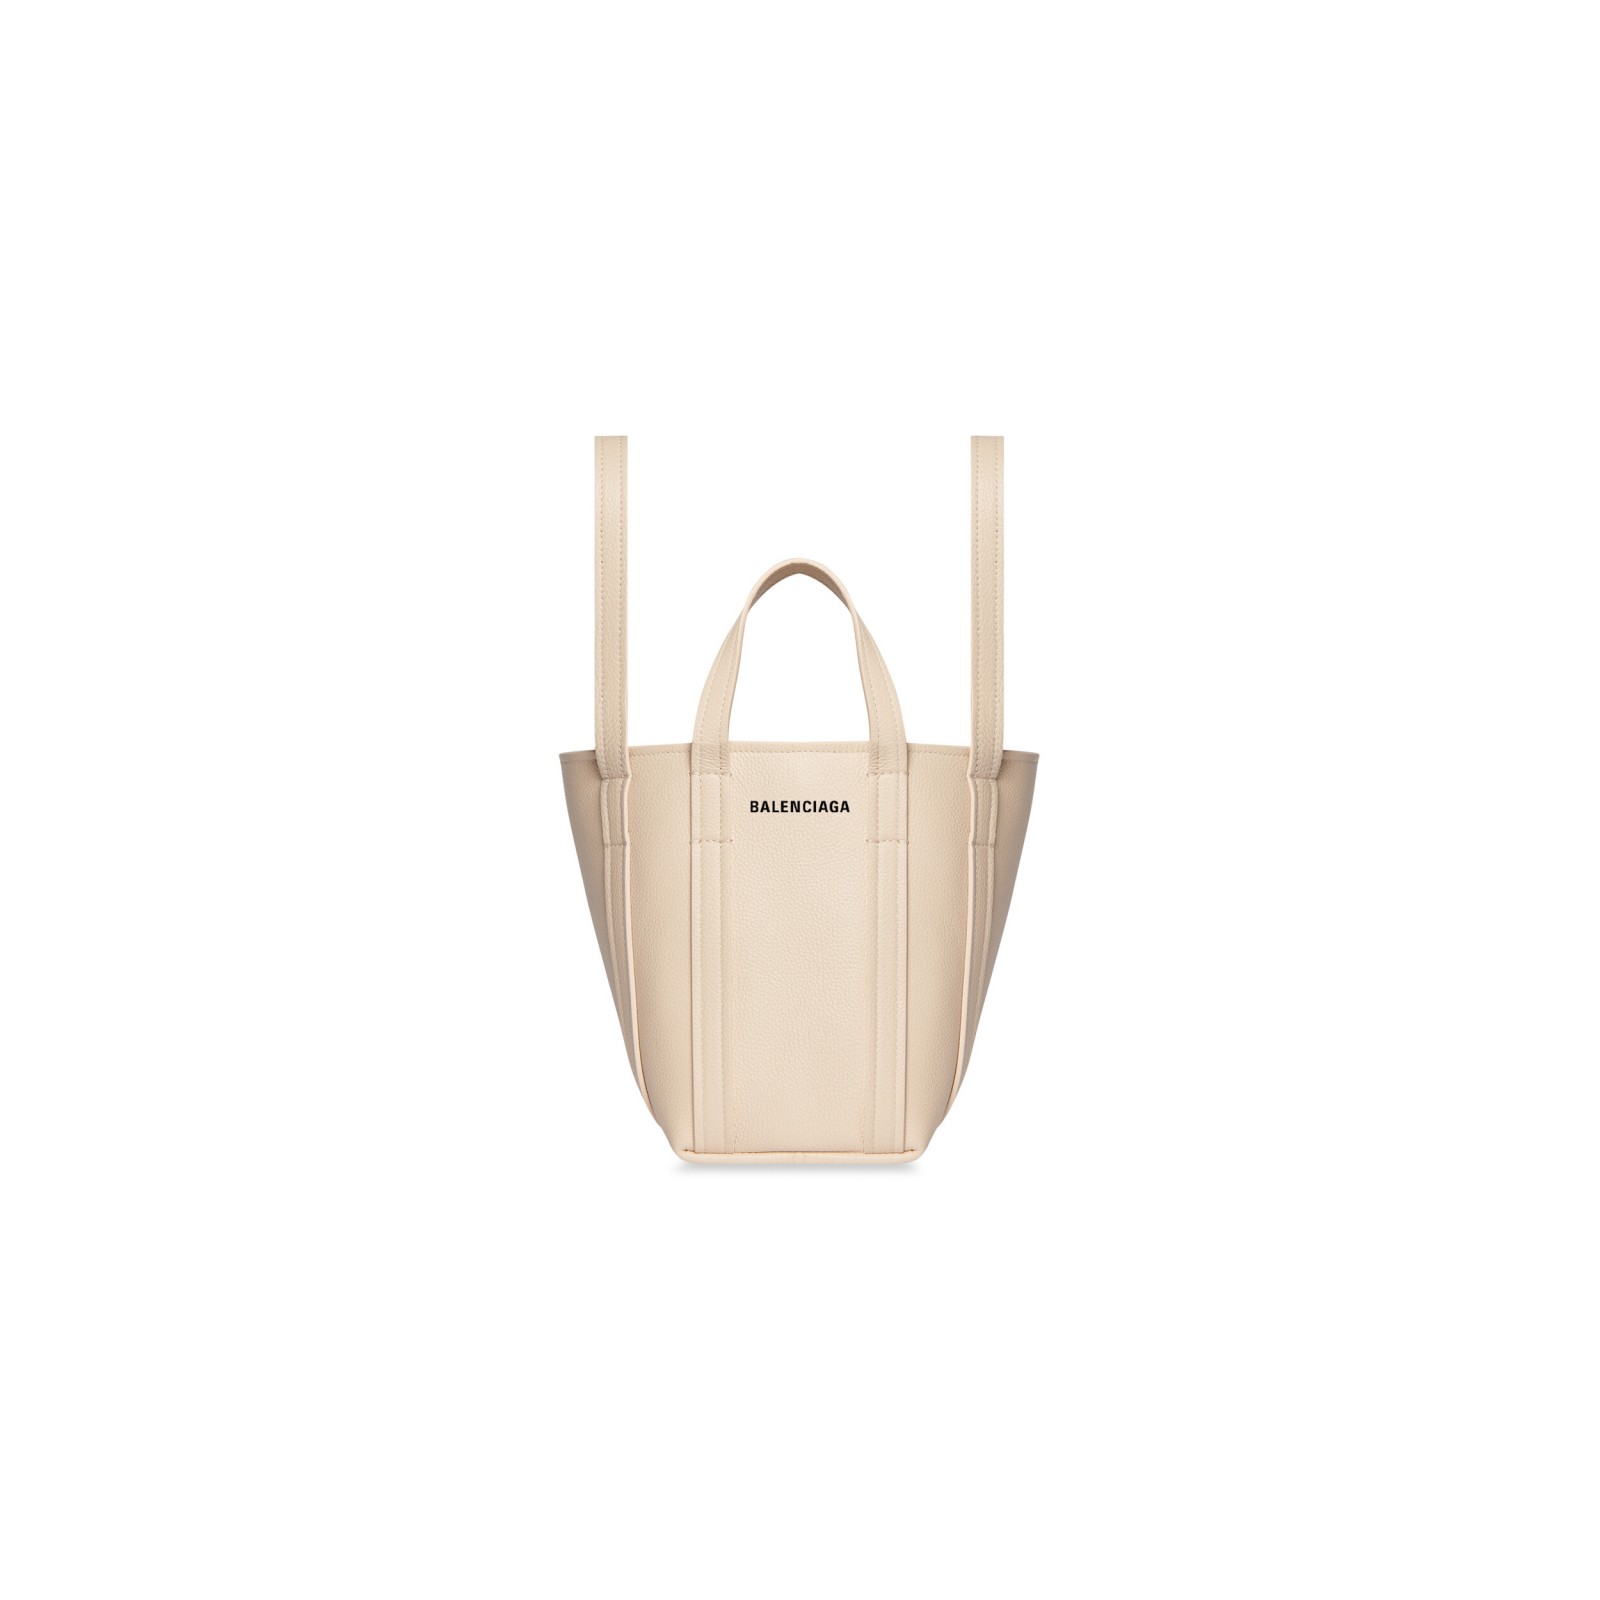 EVERYDAY 2.0 XS NORTH-SOUTH SHOULDER TOTE BAG